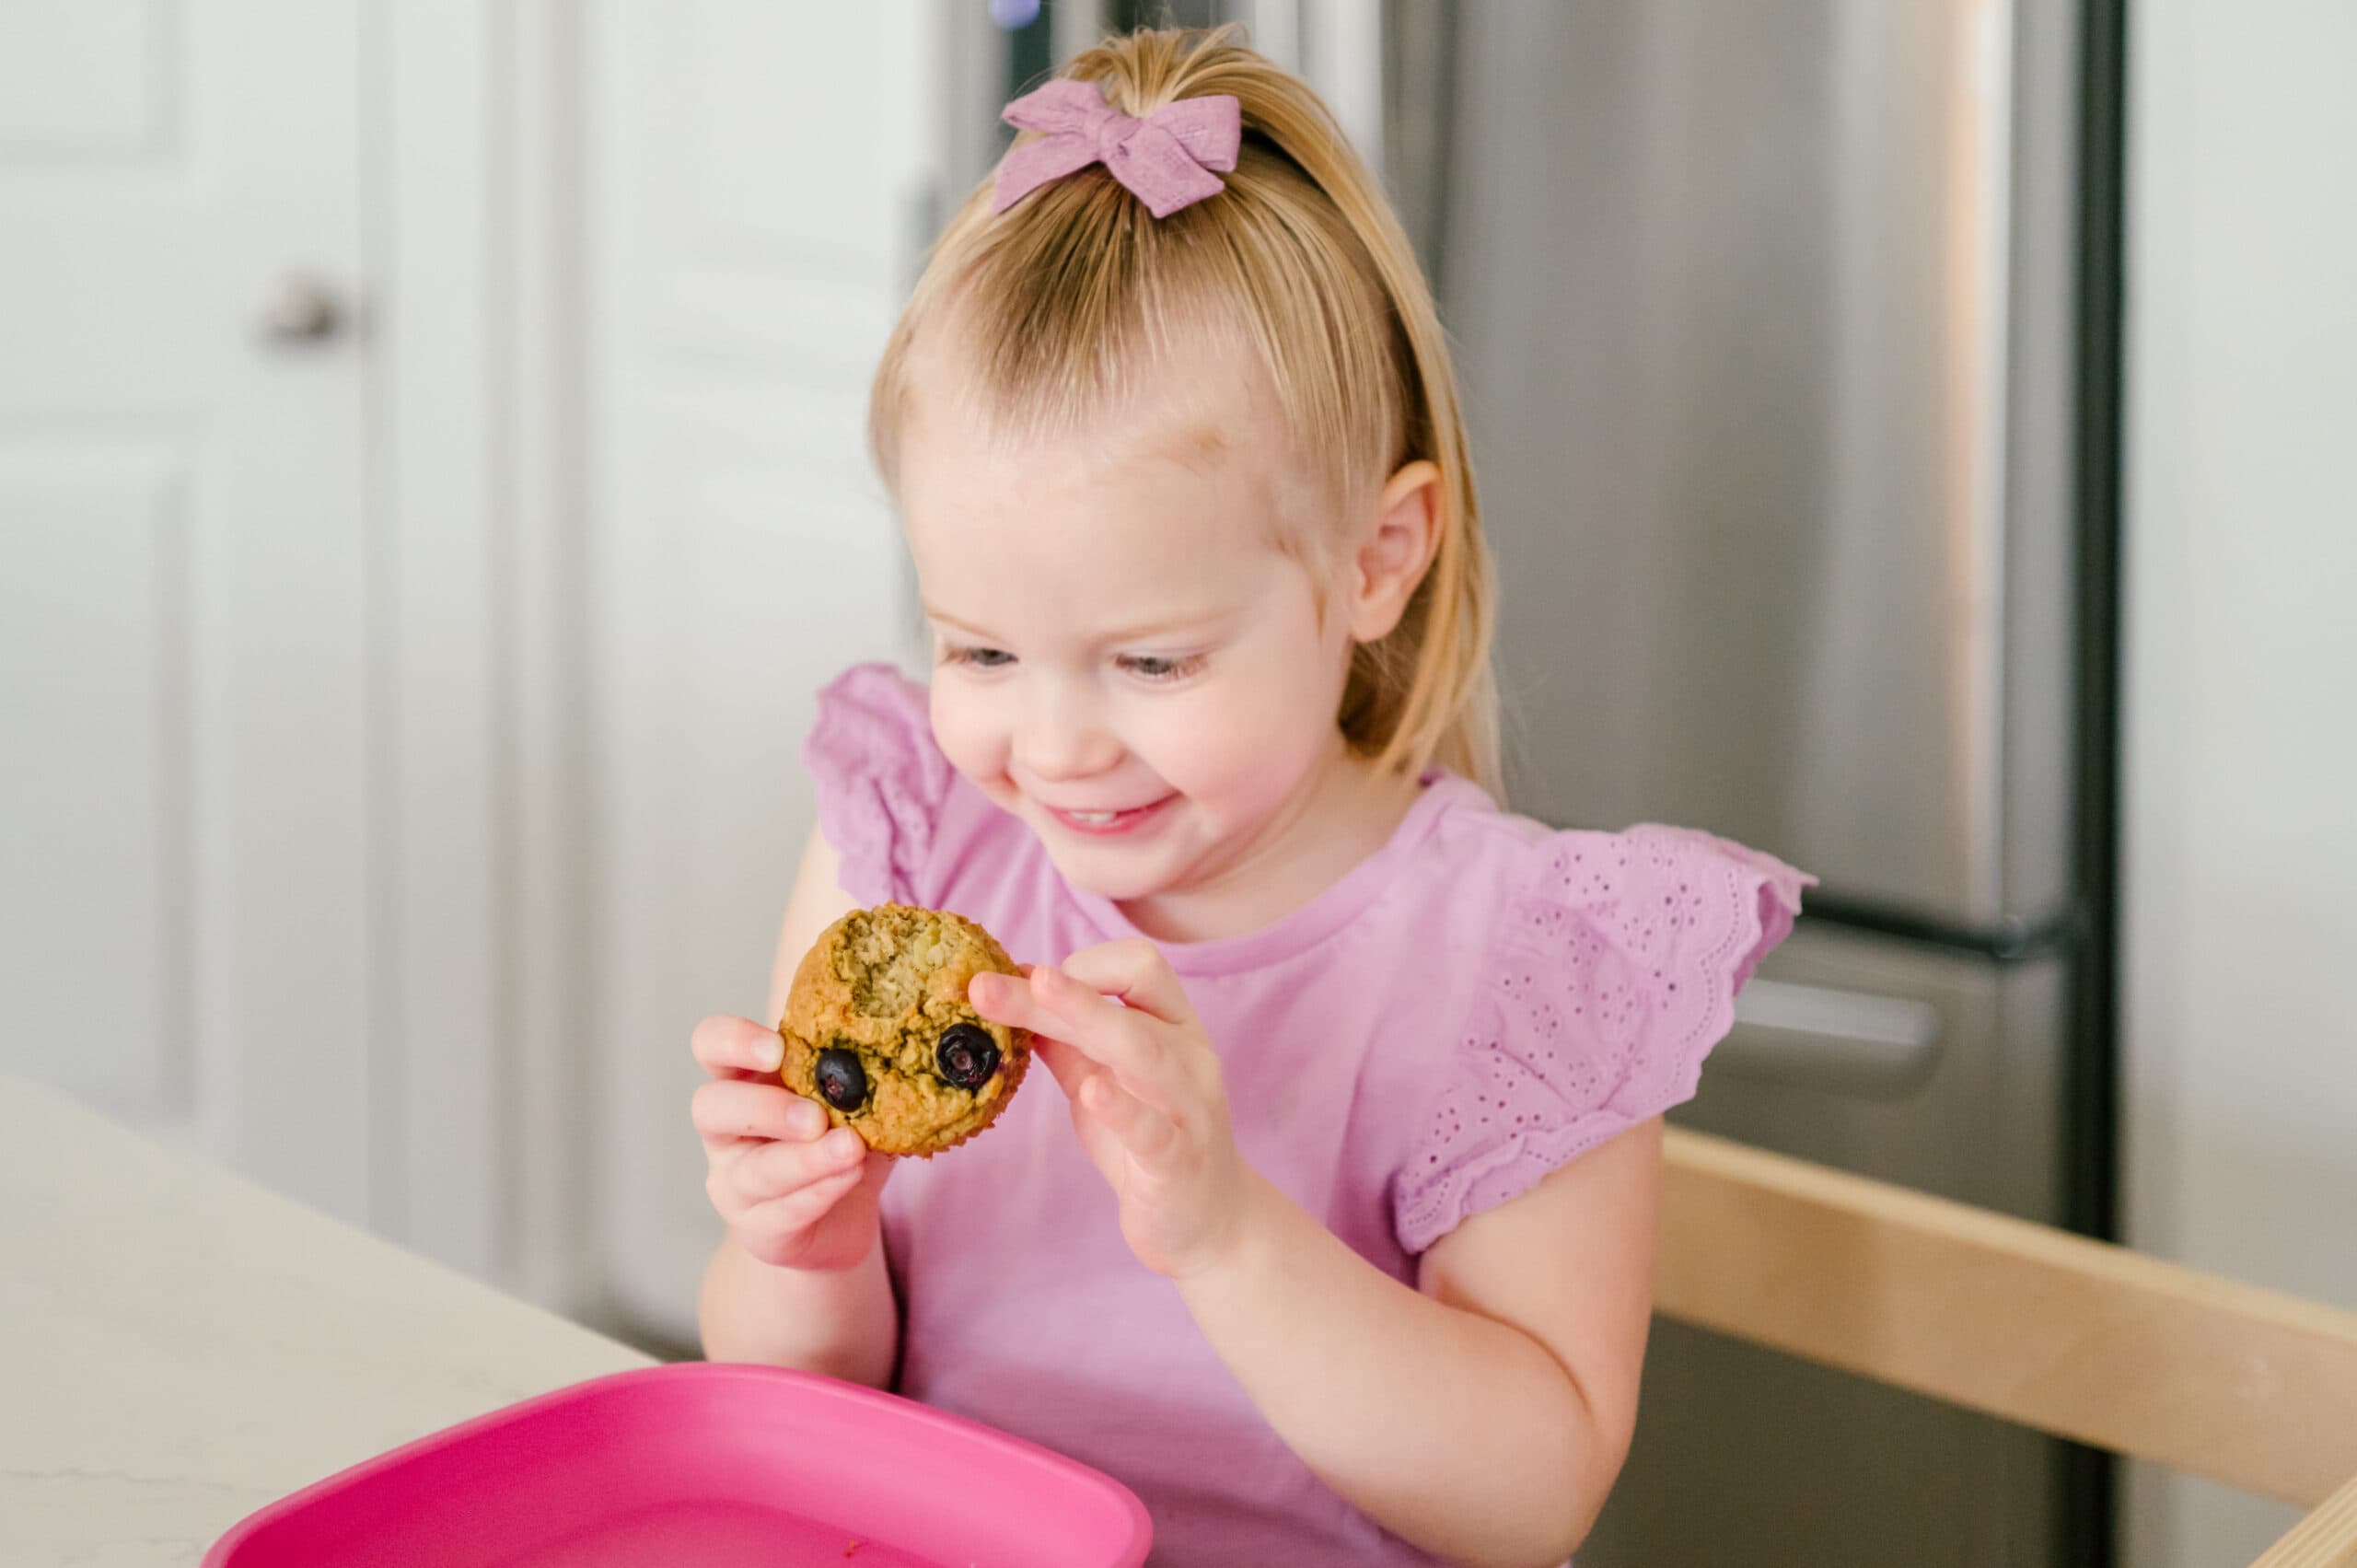 Little girl looking at a muffin she is holding